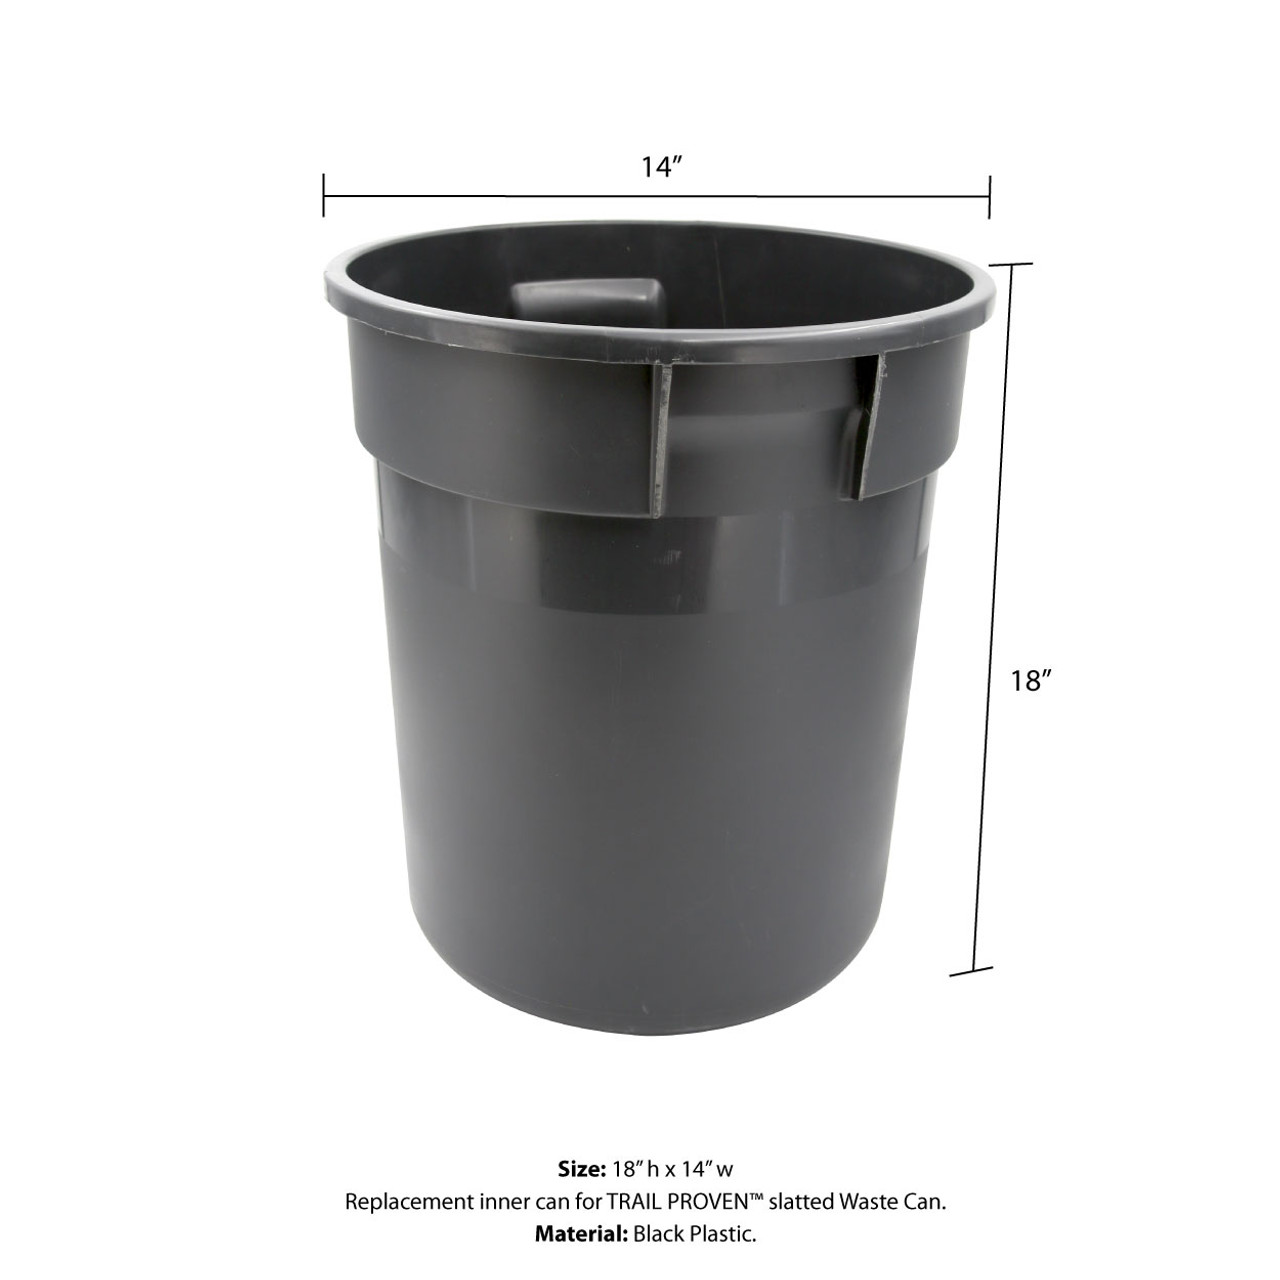 TRAIL PROVEN™ WASTE CAN Replacement Plastic Inner Can